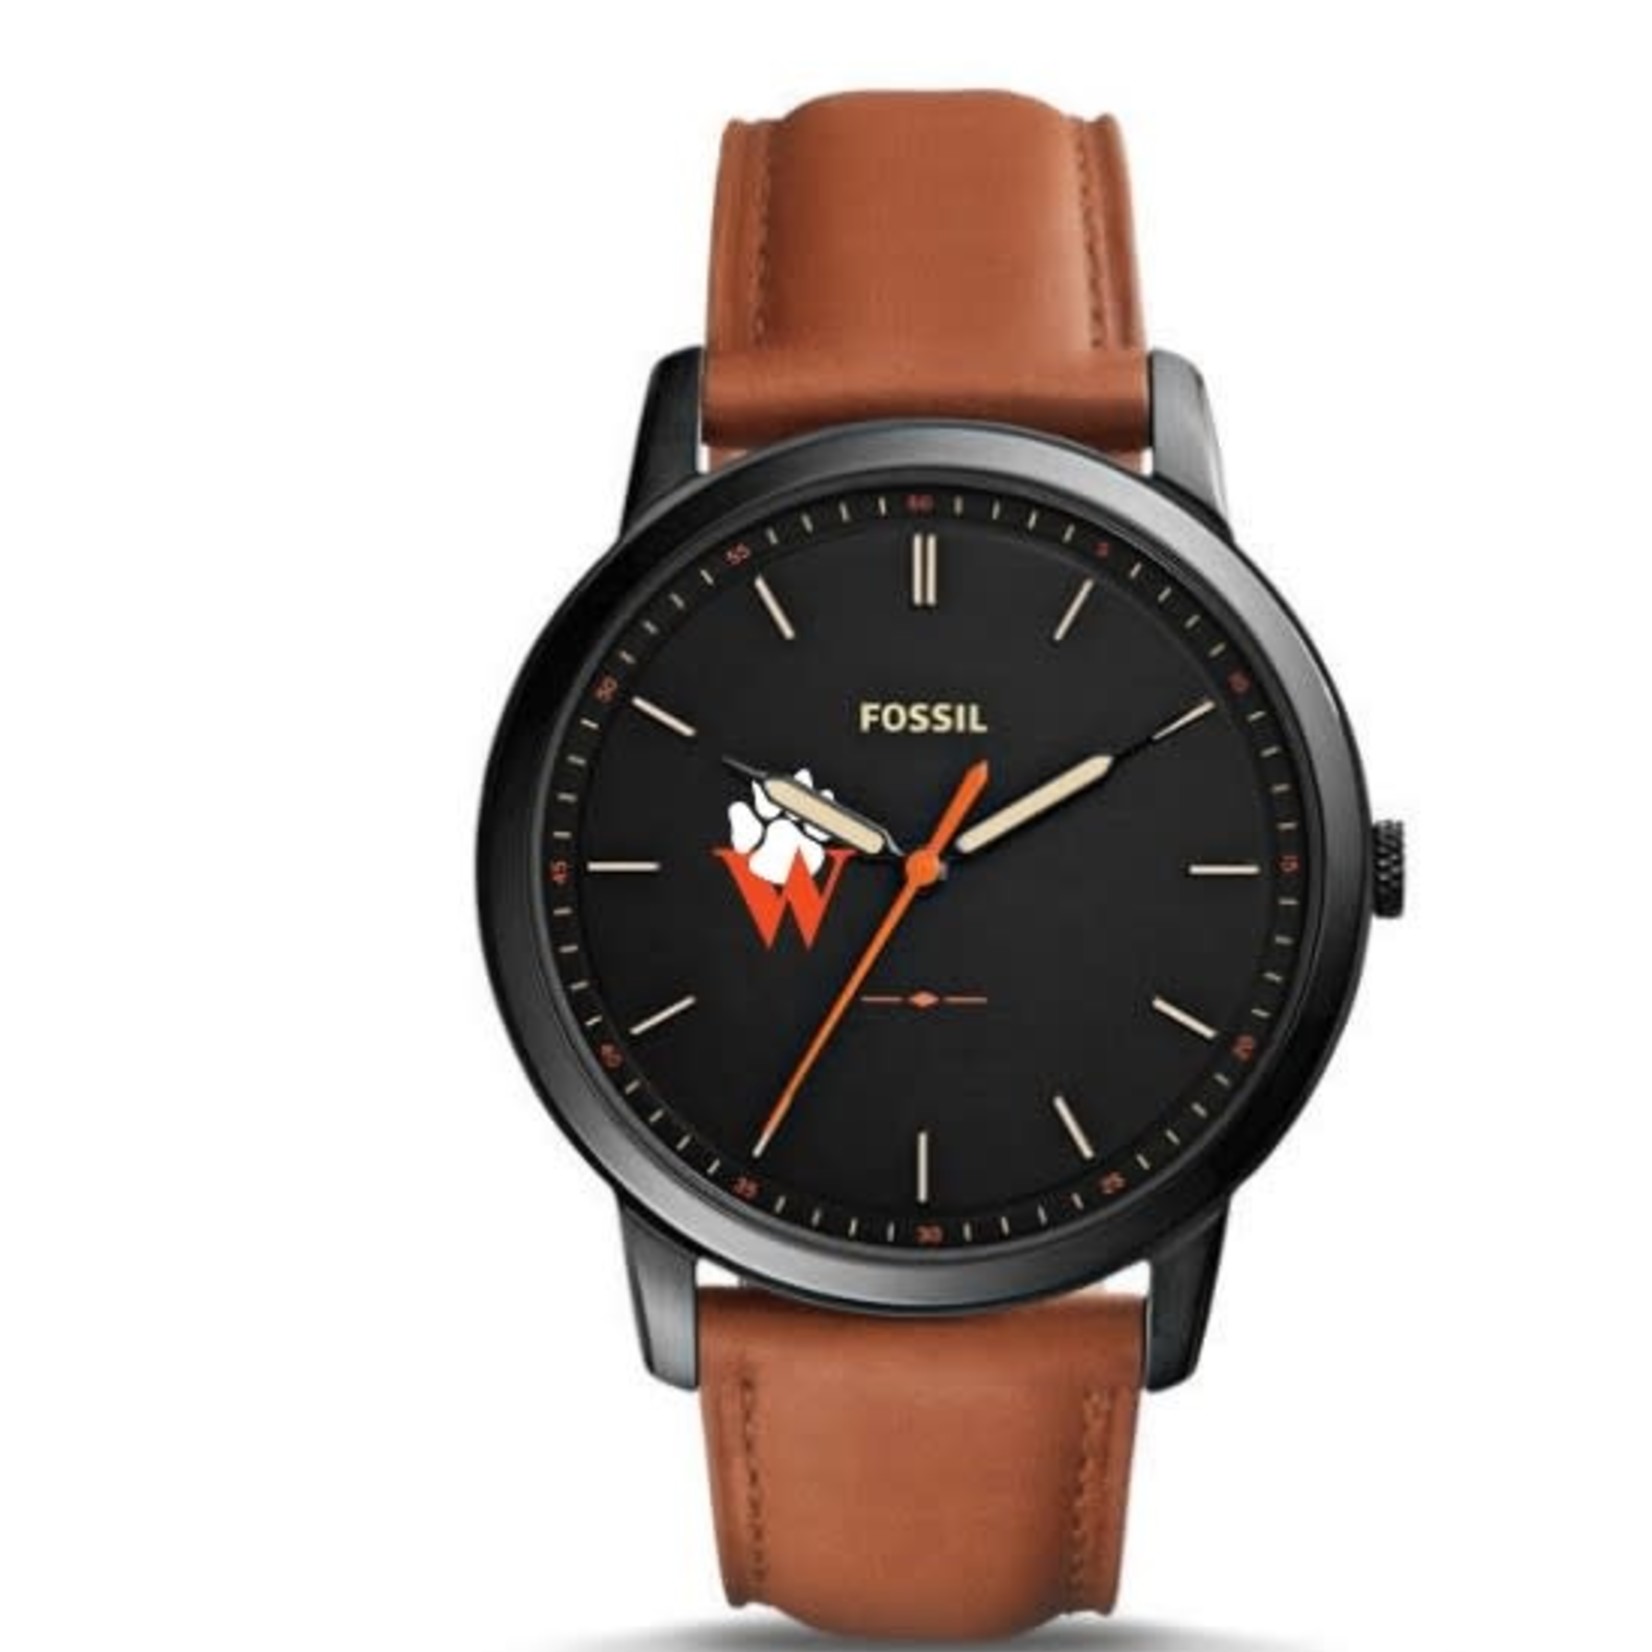 Fossil Fossil- The Minimalist Slim Light Brown Leather Watch